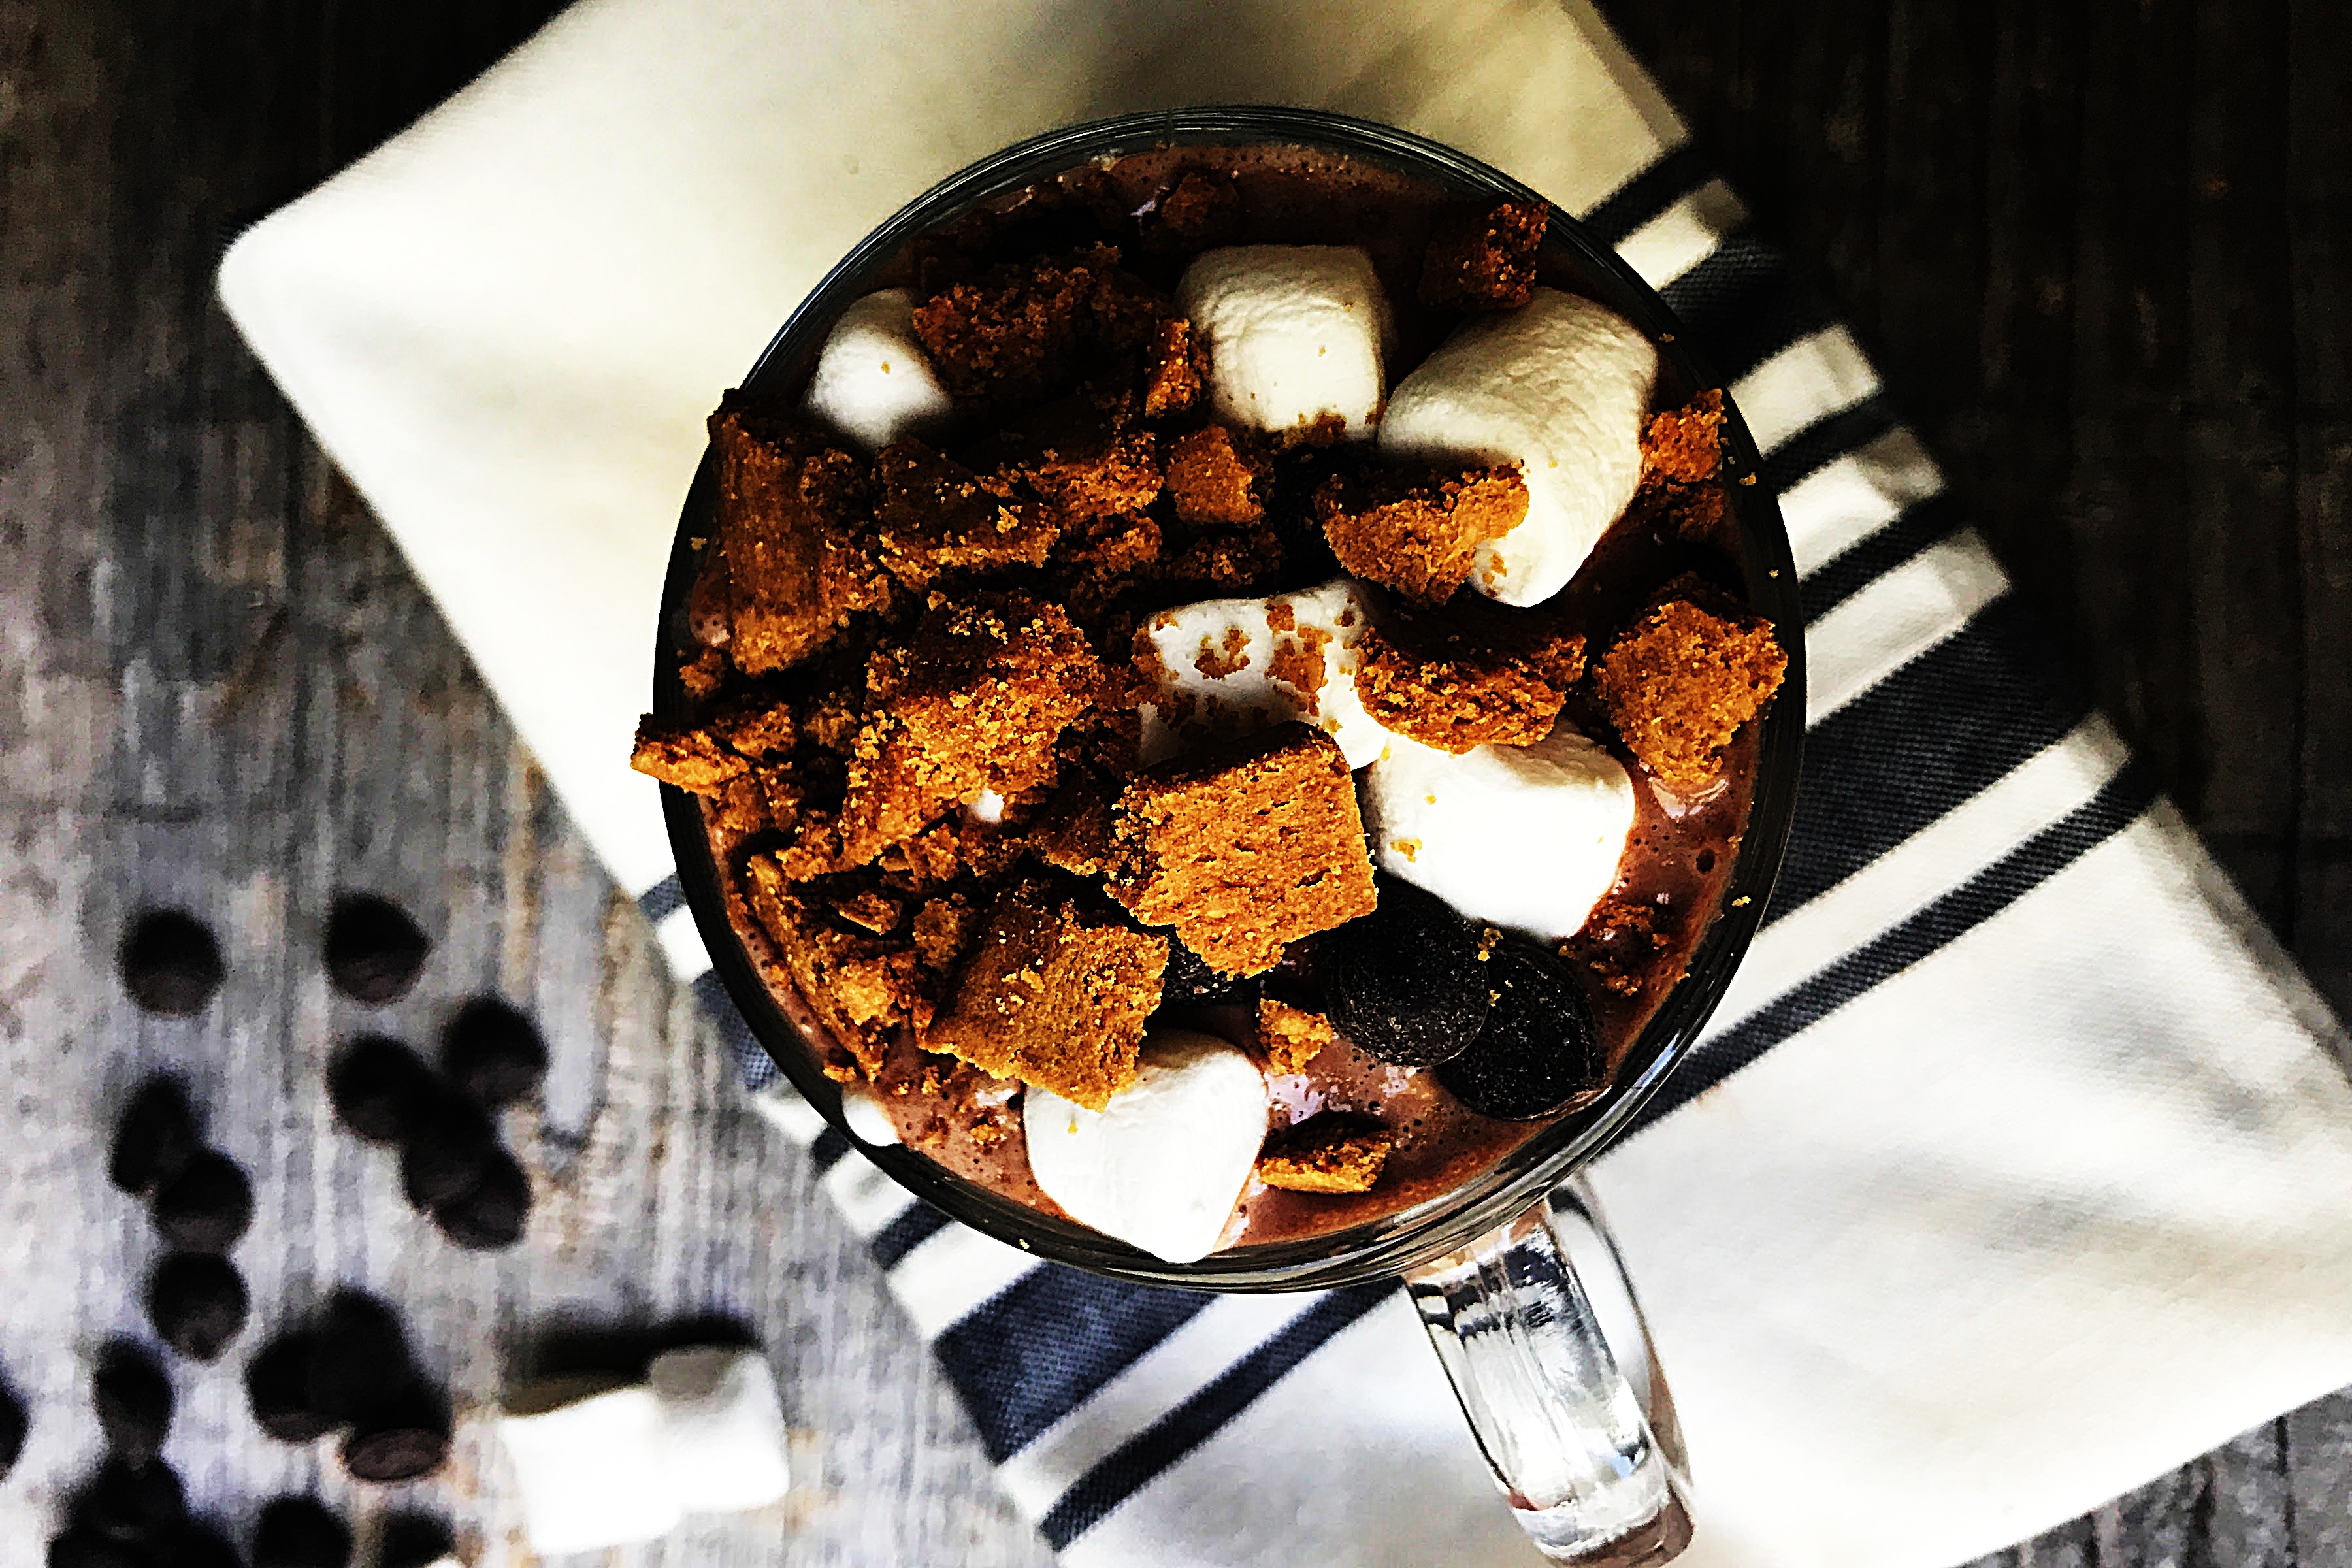 Stupid-Easy Recipe for S’mores Overnight Oats (#1 Top-Rated)